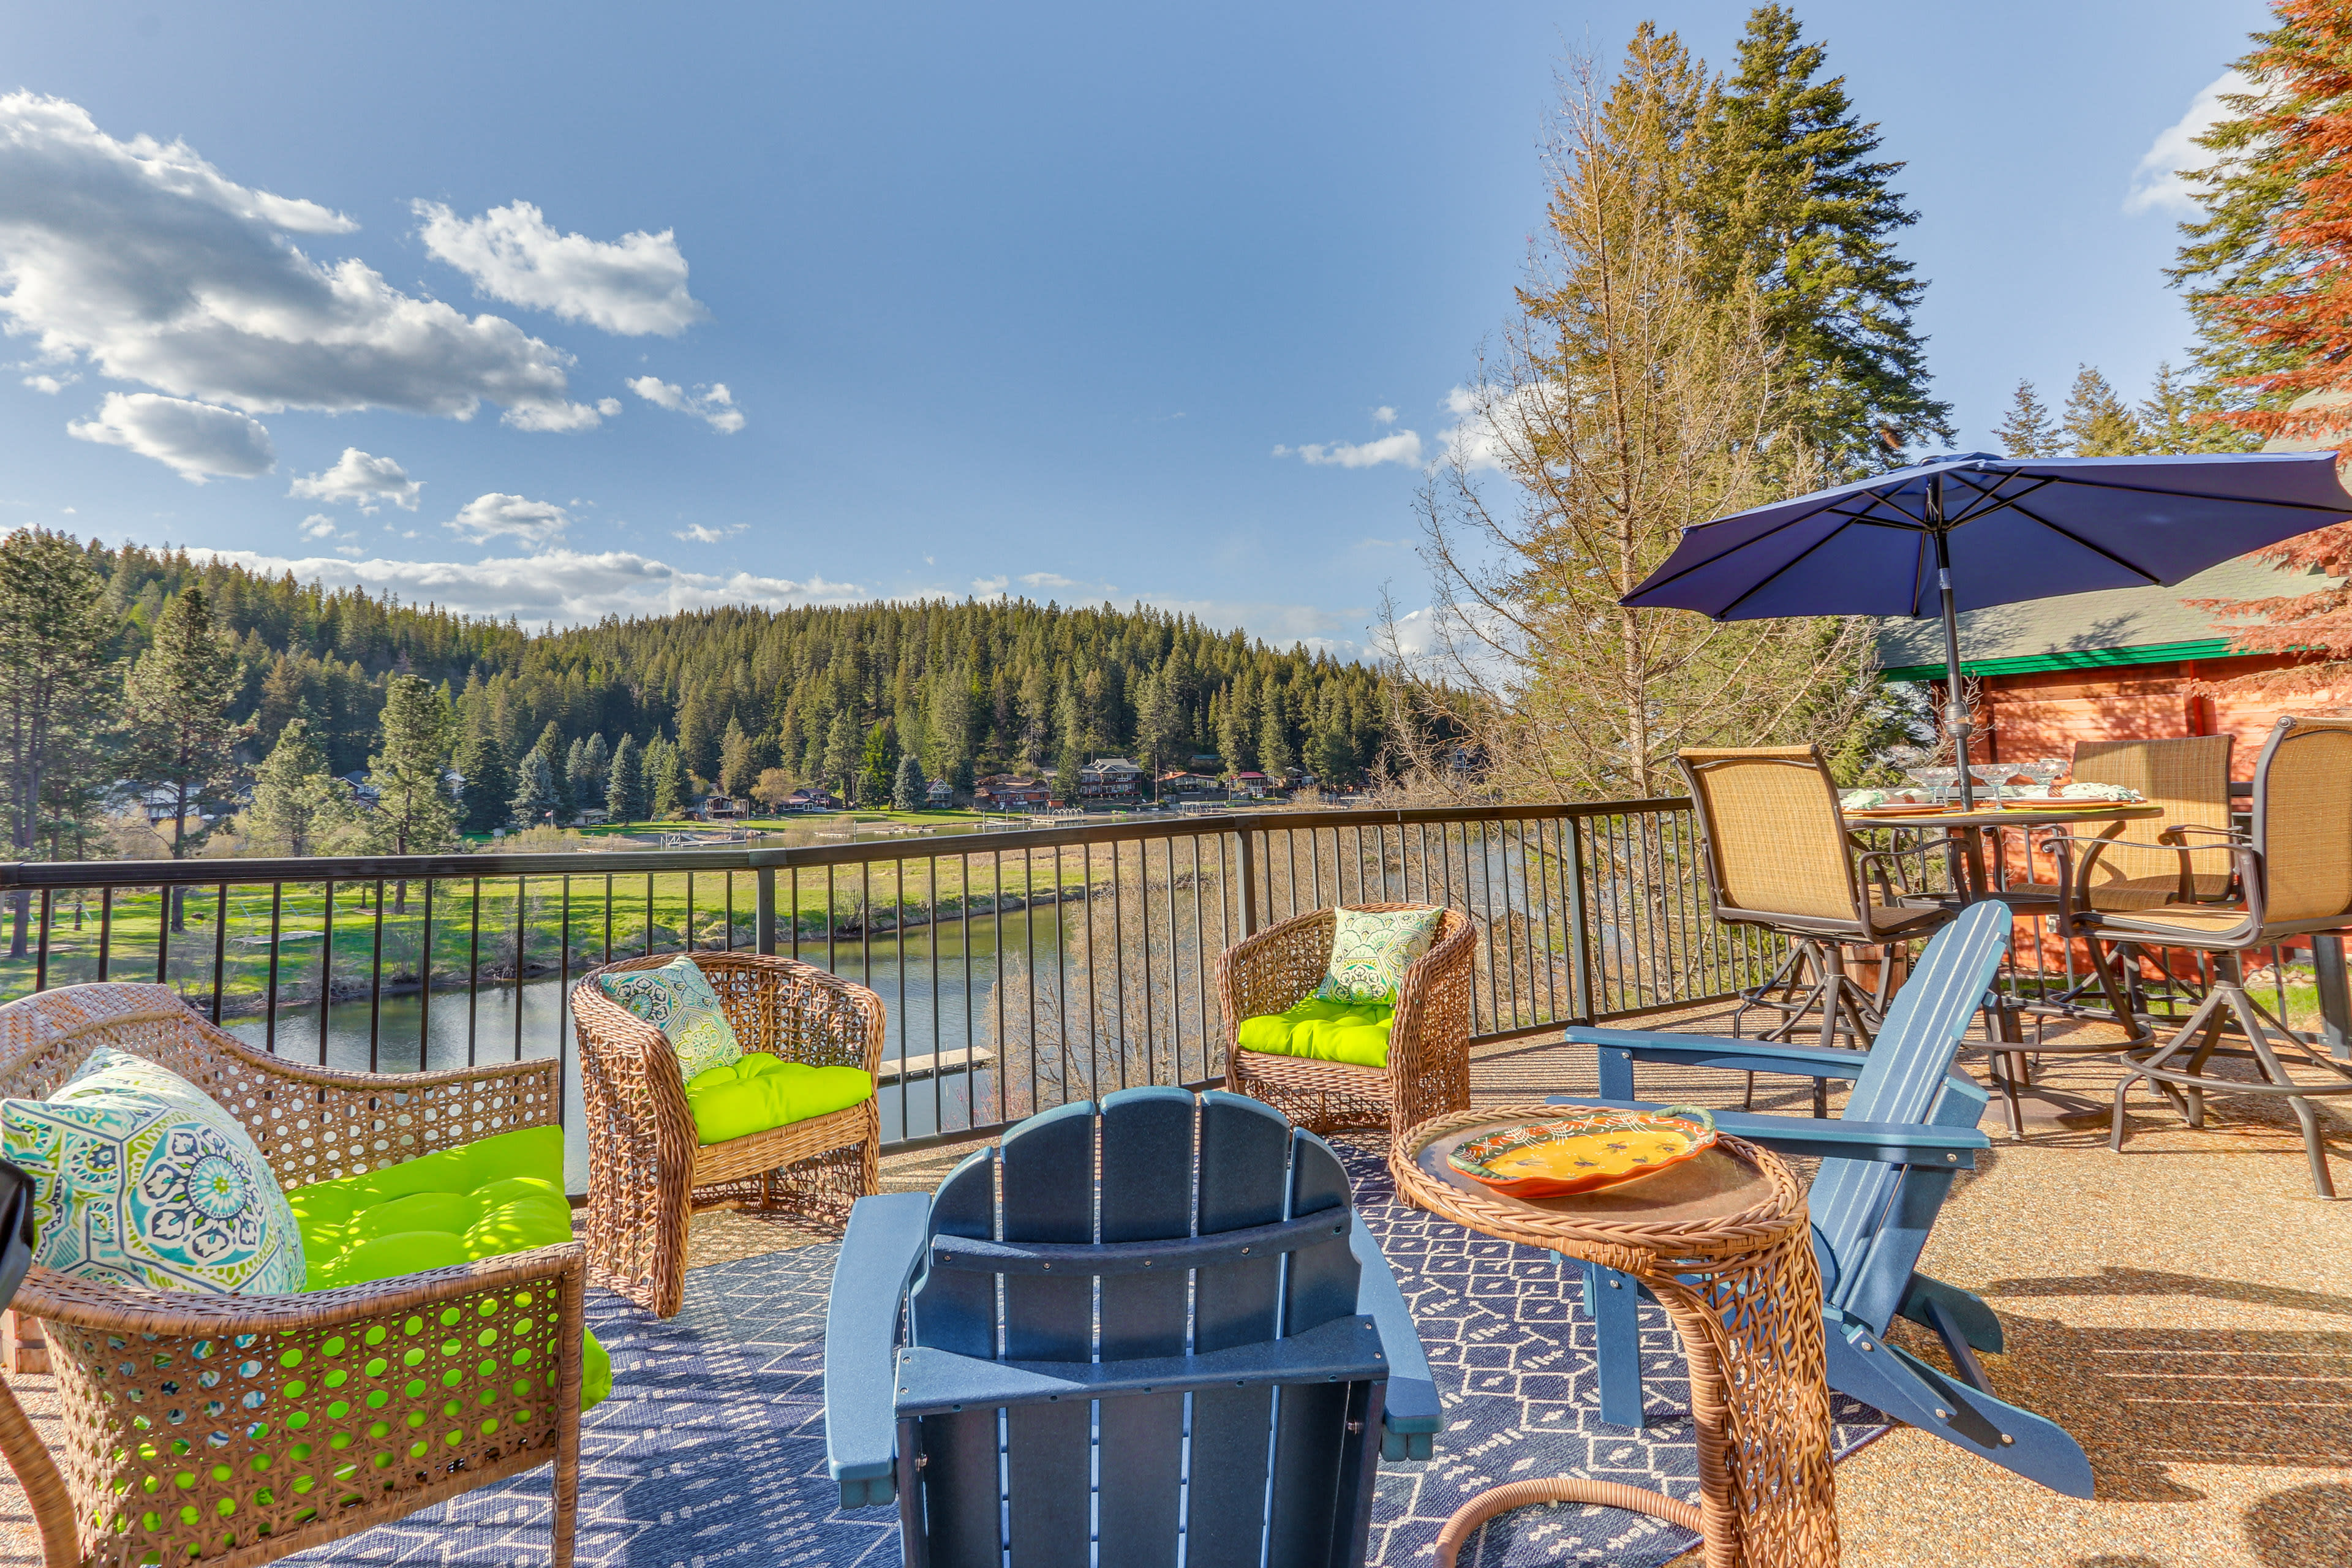 Coeur d'Alene Vacation Rental | 3BR | 2.5BA | Stairs Required | 1,450 Sq Ft